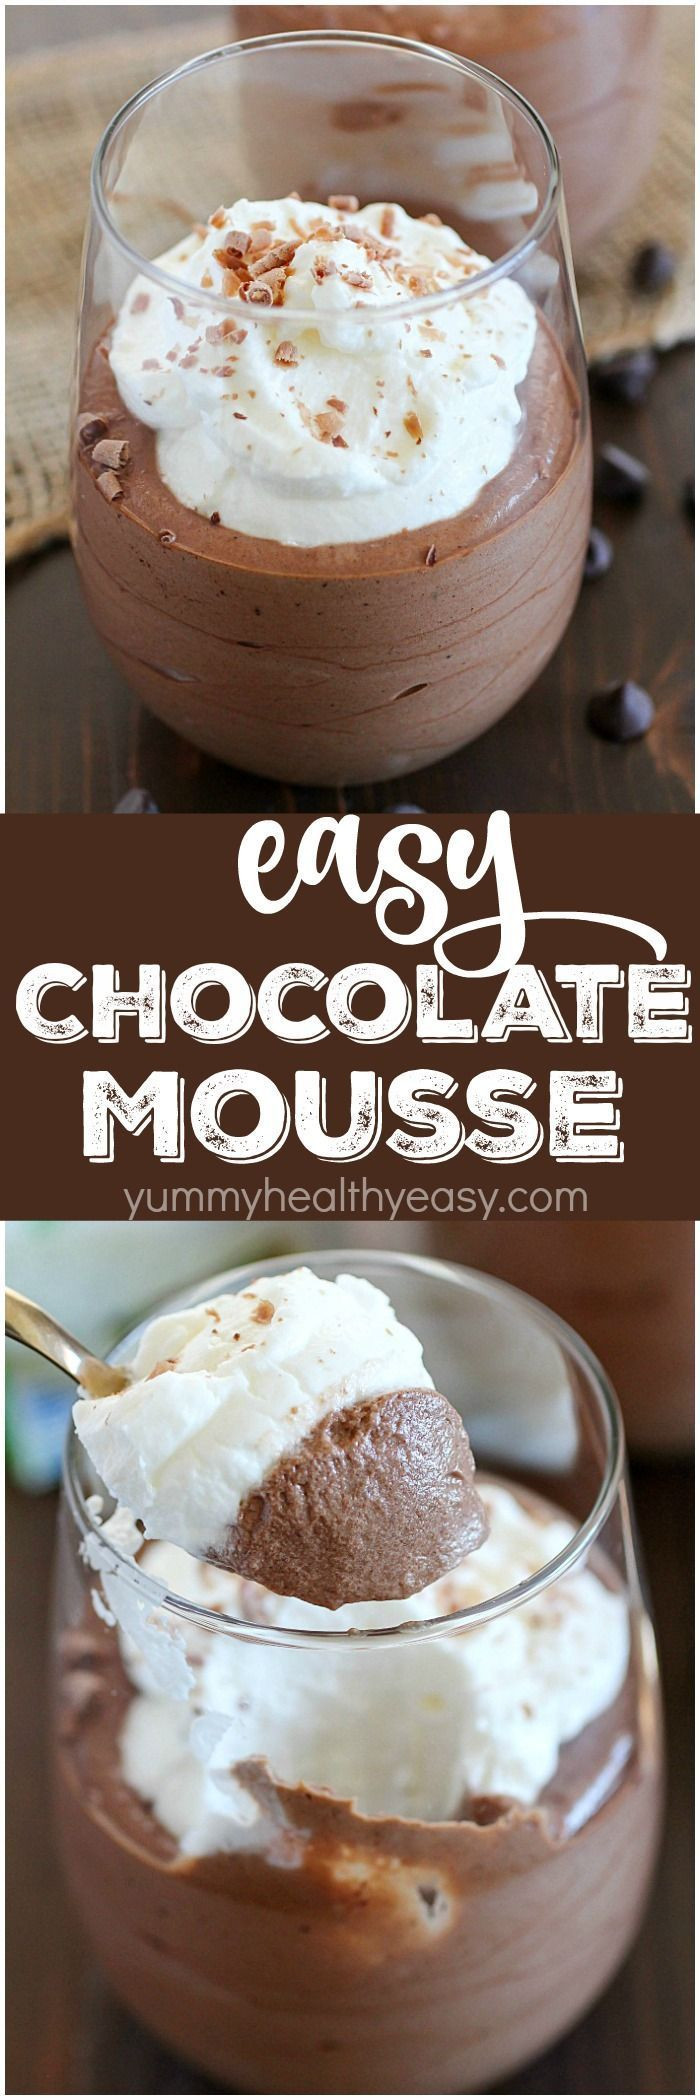 Quick And Easy Desserts With Few Ingredients
 Chocolate Mousse that s incredibly easy to make with only